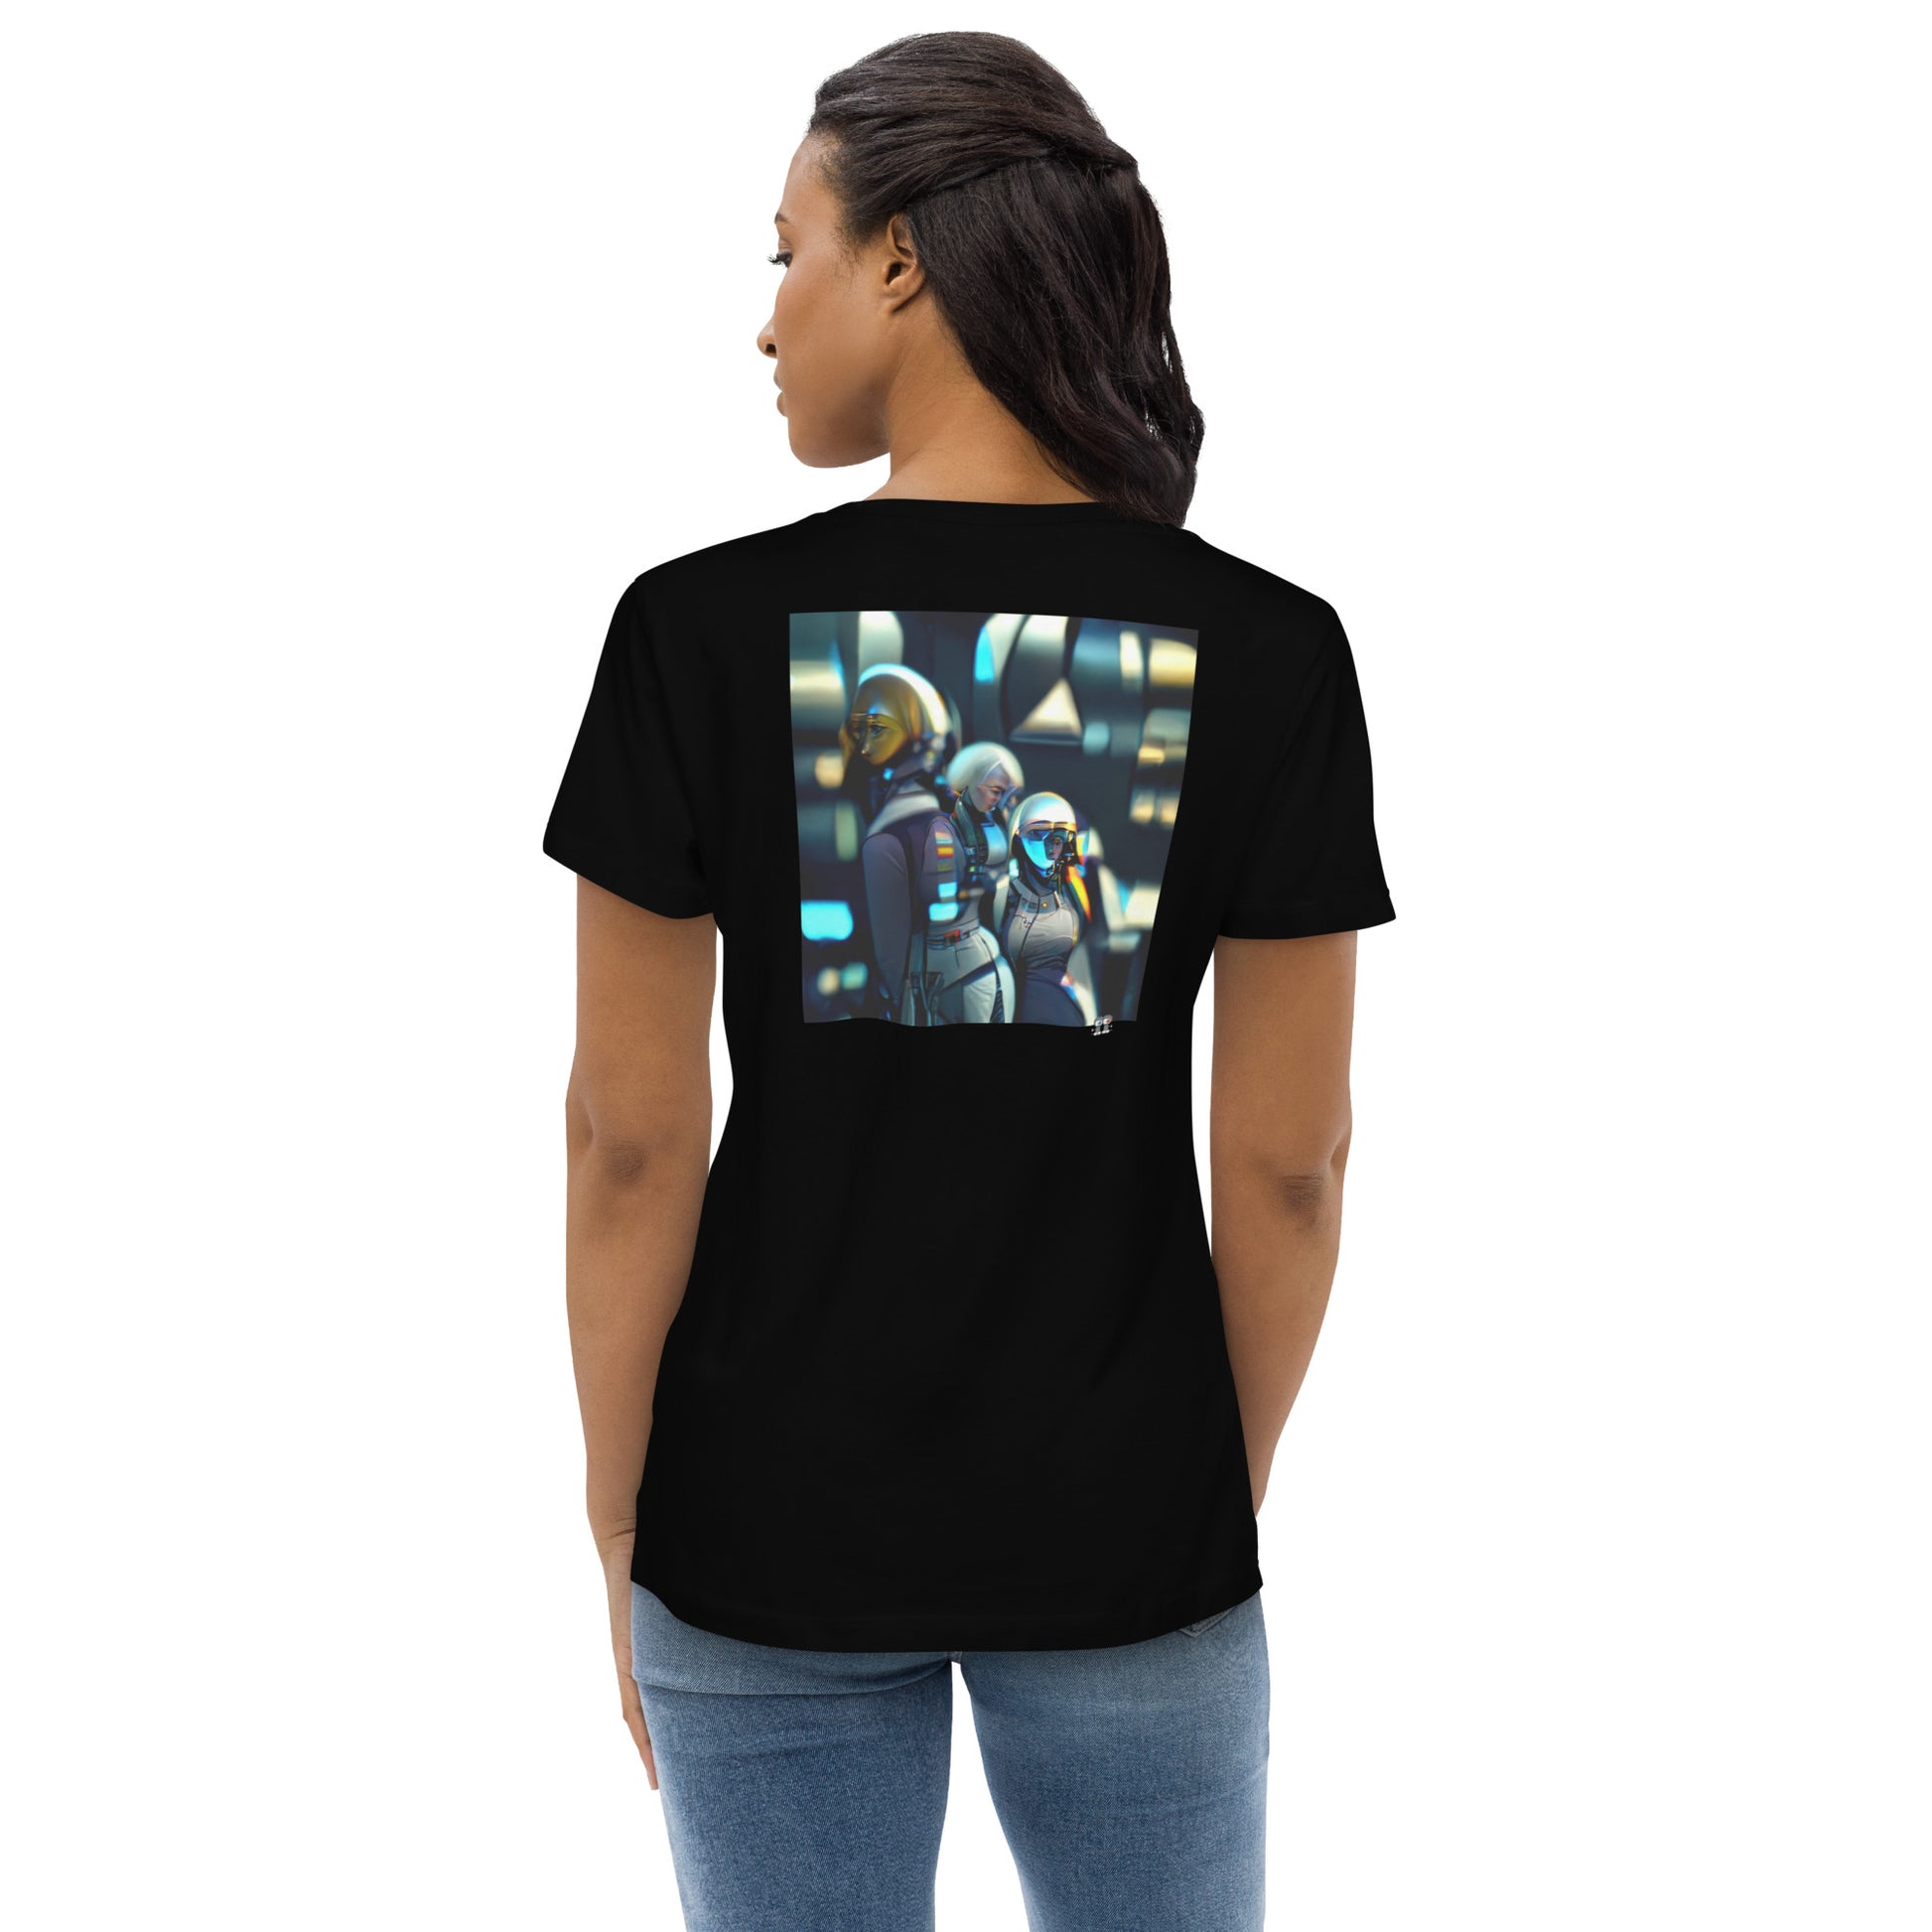 Fall 2022 - Women's fitted eco tee - Spoiled Robots